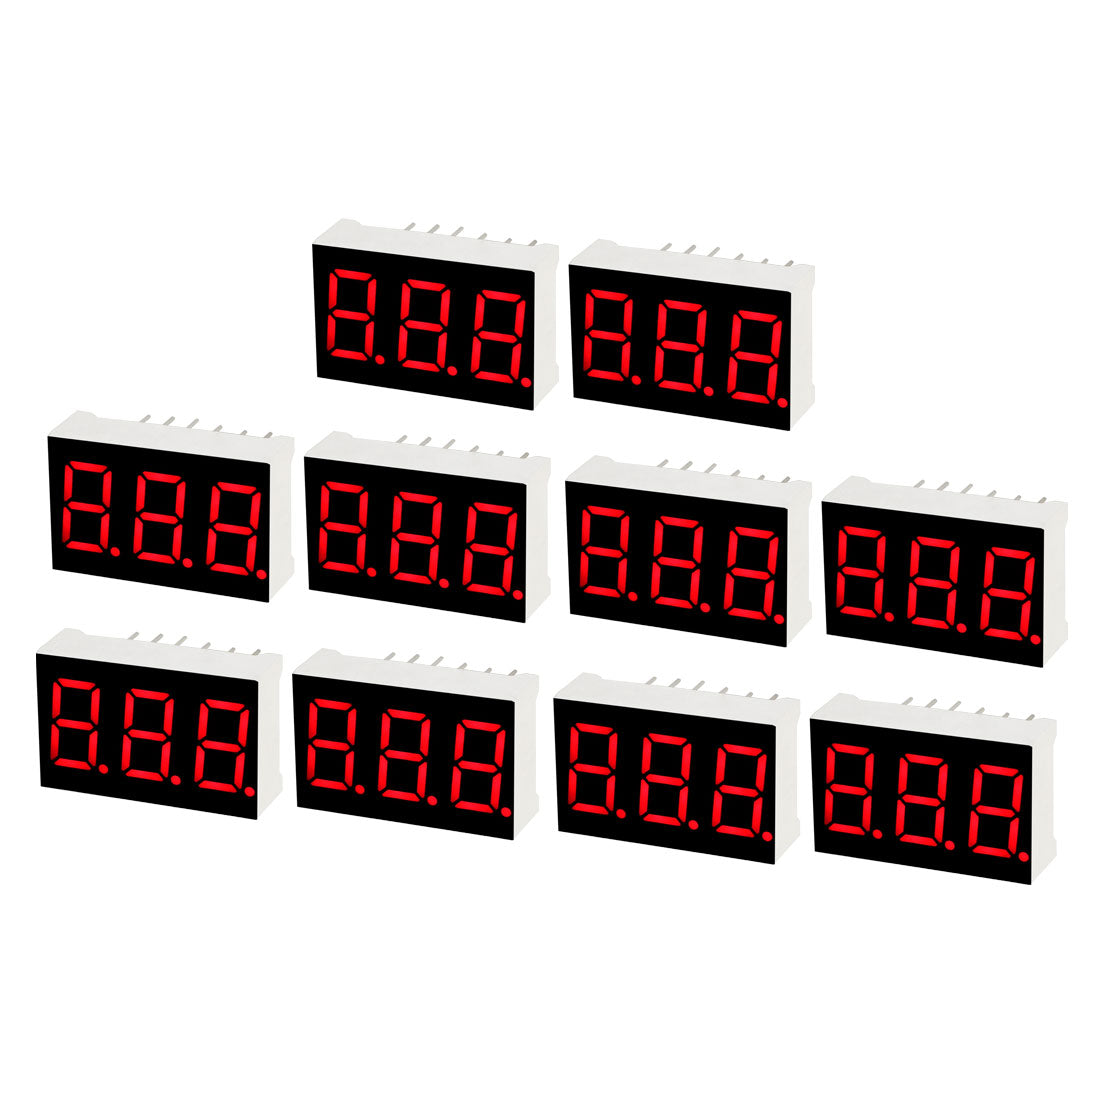 uxcell Uxcell Common Anode 11 Pin 3 Bit 7 Segment 0.89 x 0.55 x 0.28 Inch 0.35" Red LED Display Digital Tube 10pcs